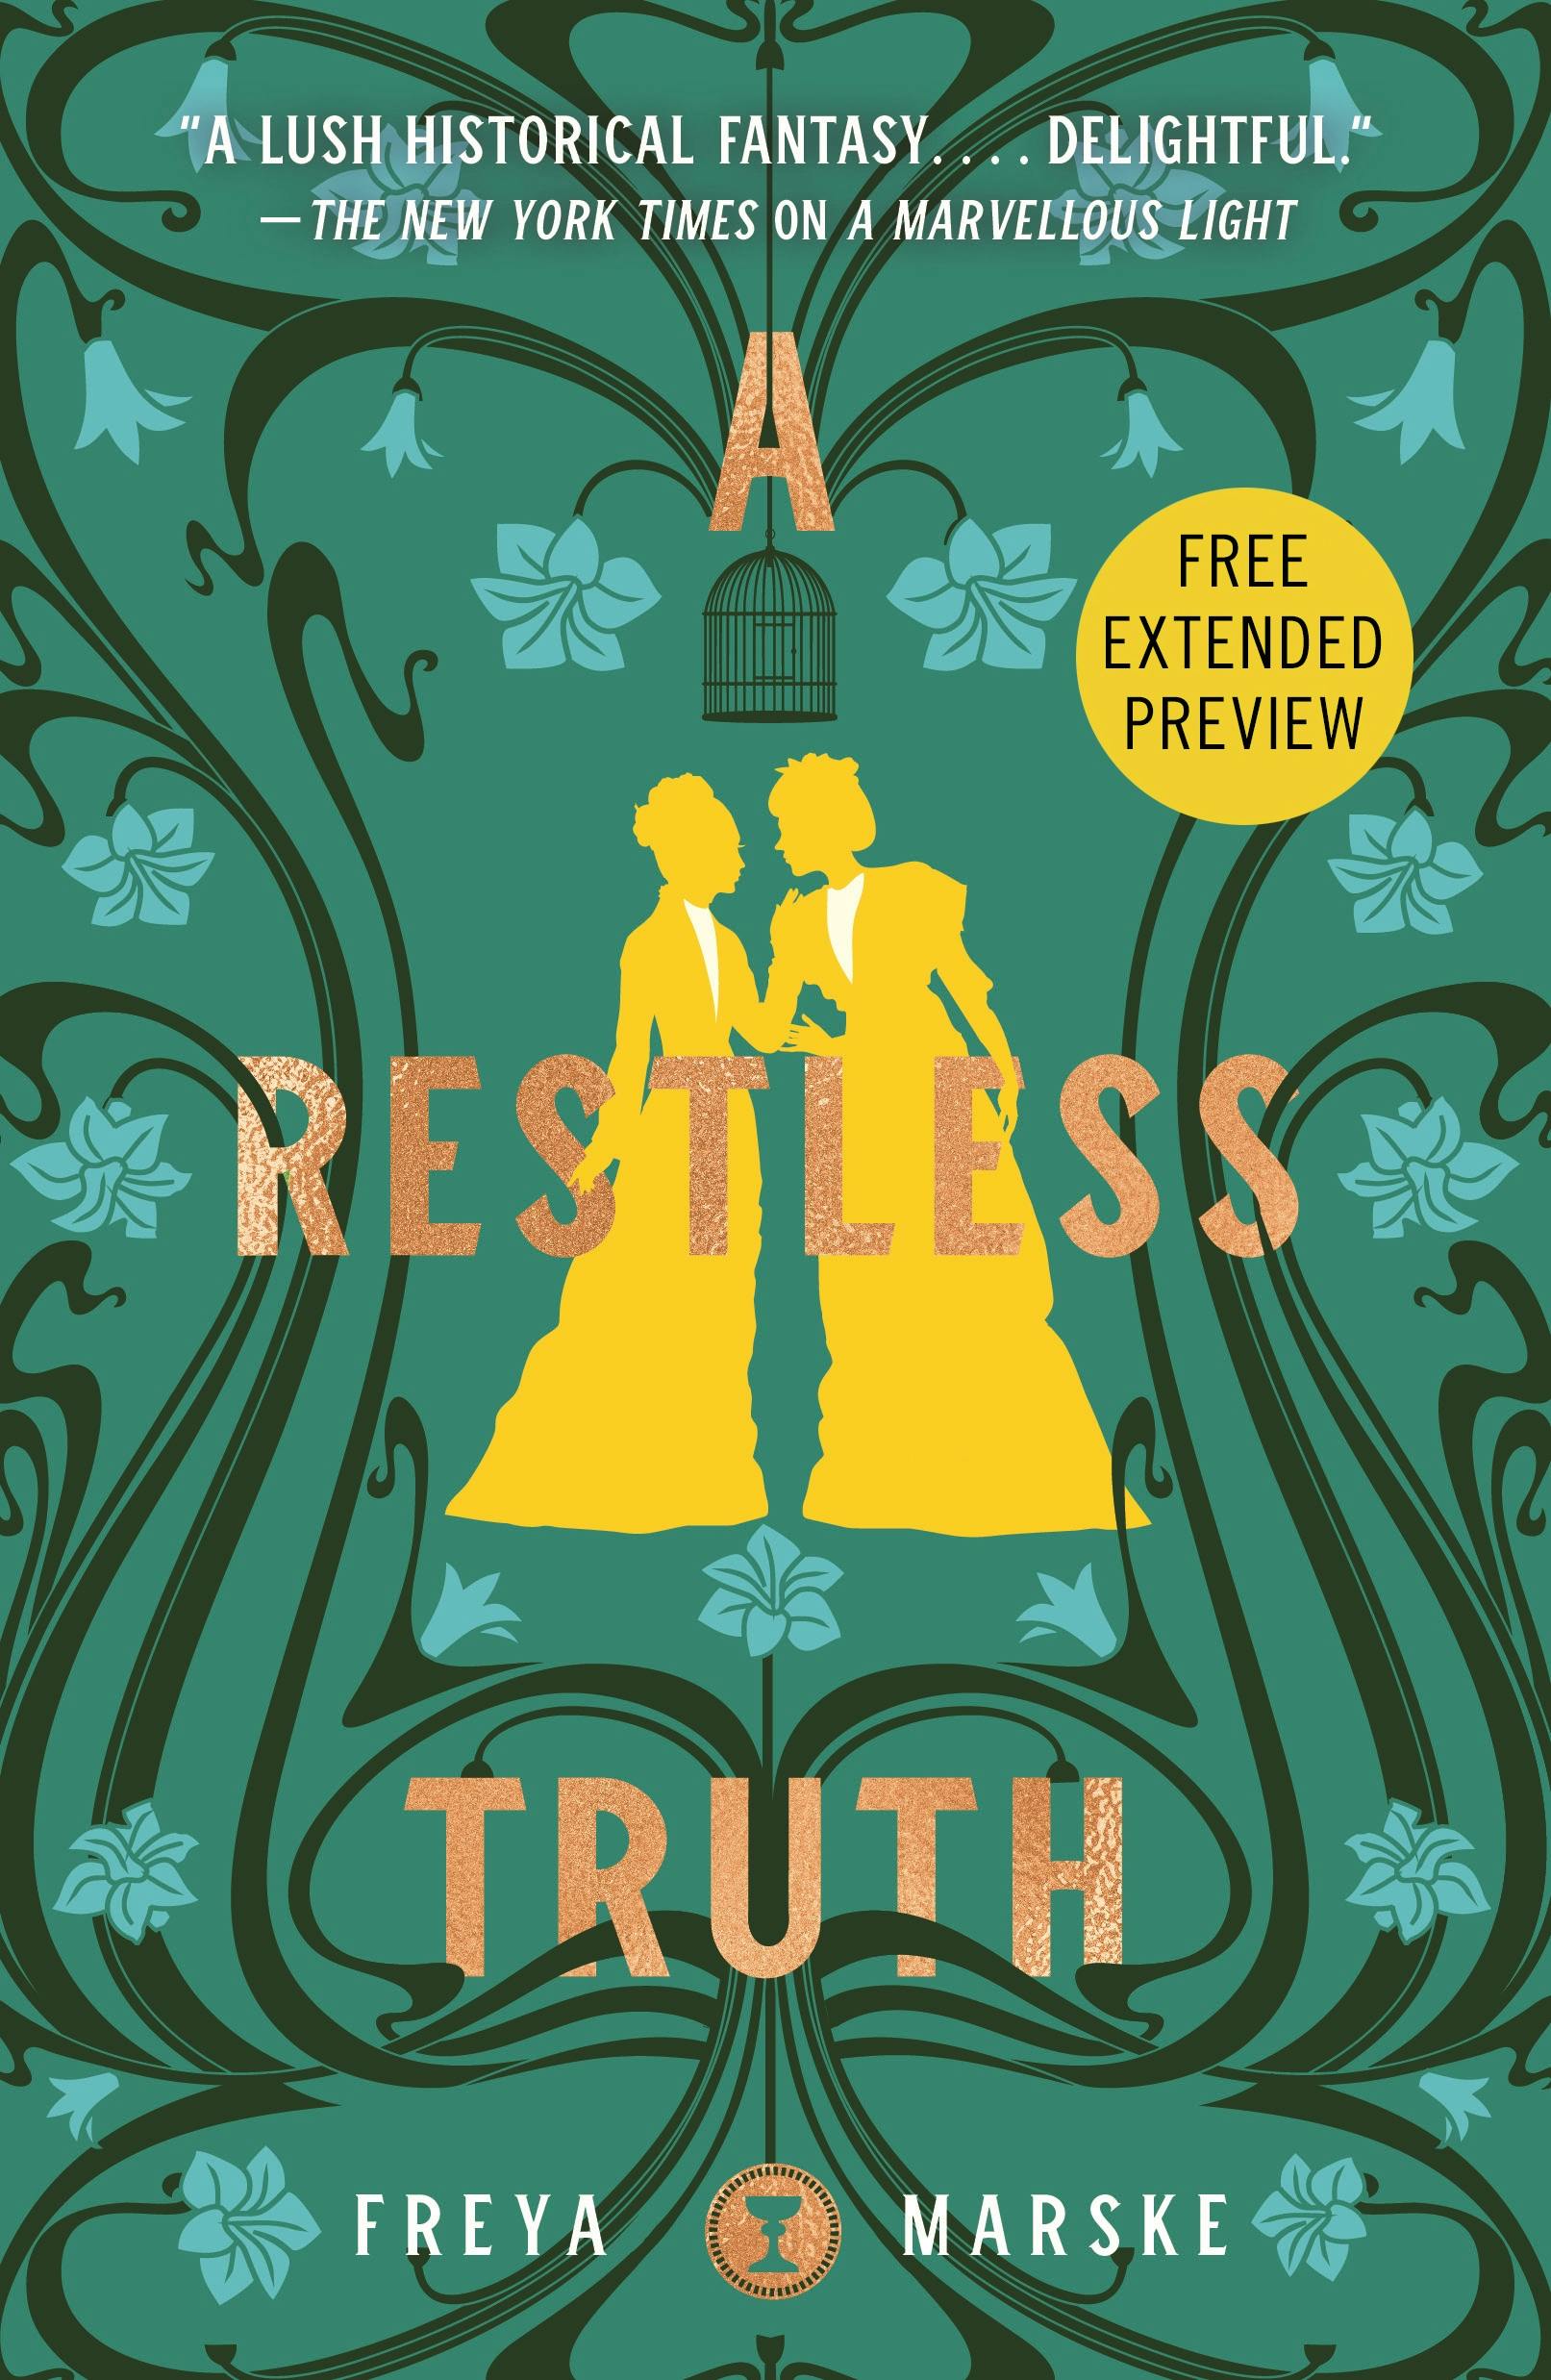 Cover for the book titled as: A Restless Truth Sneak Peek